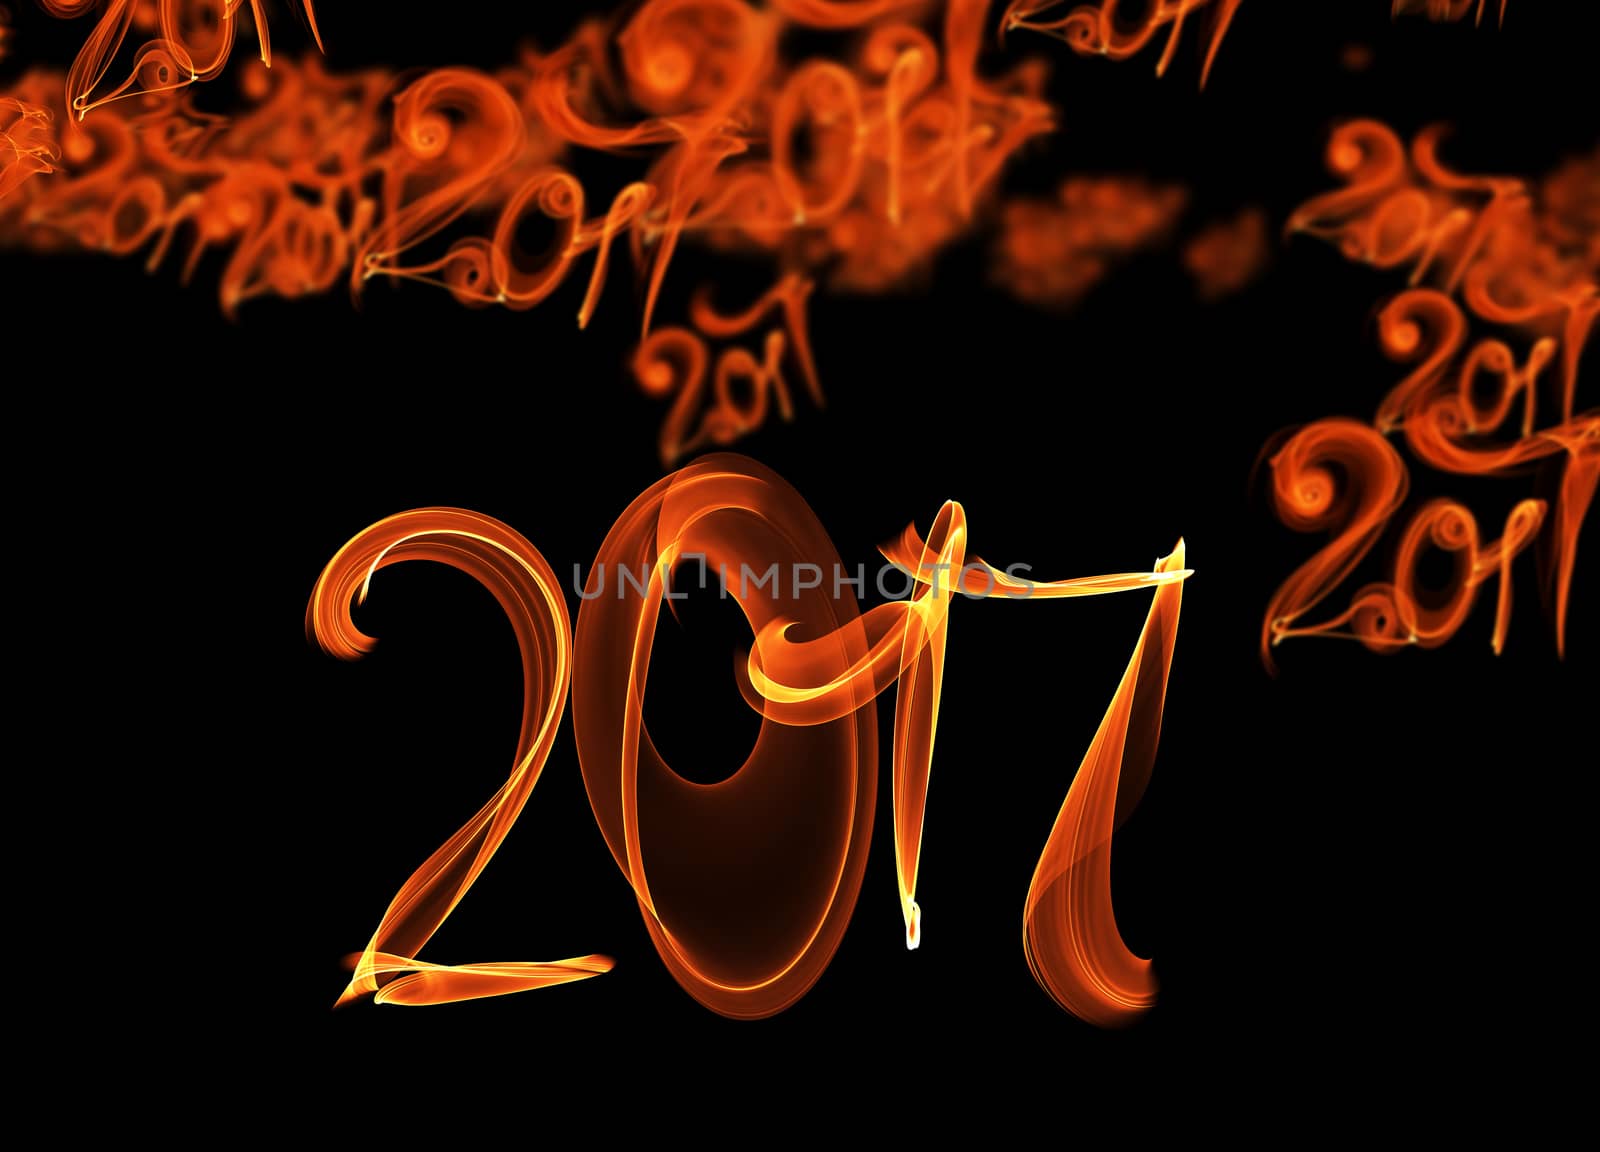 Happy new year 2017 flying digits numbers written with fire flame light on black background by skrotov